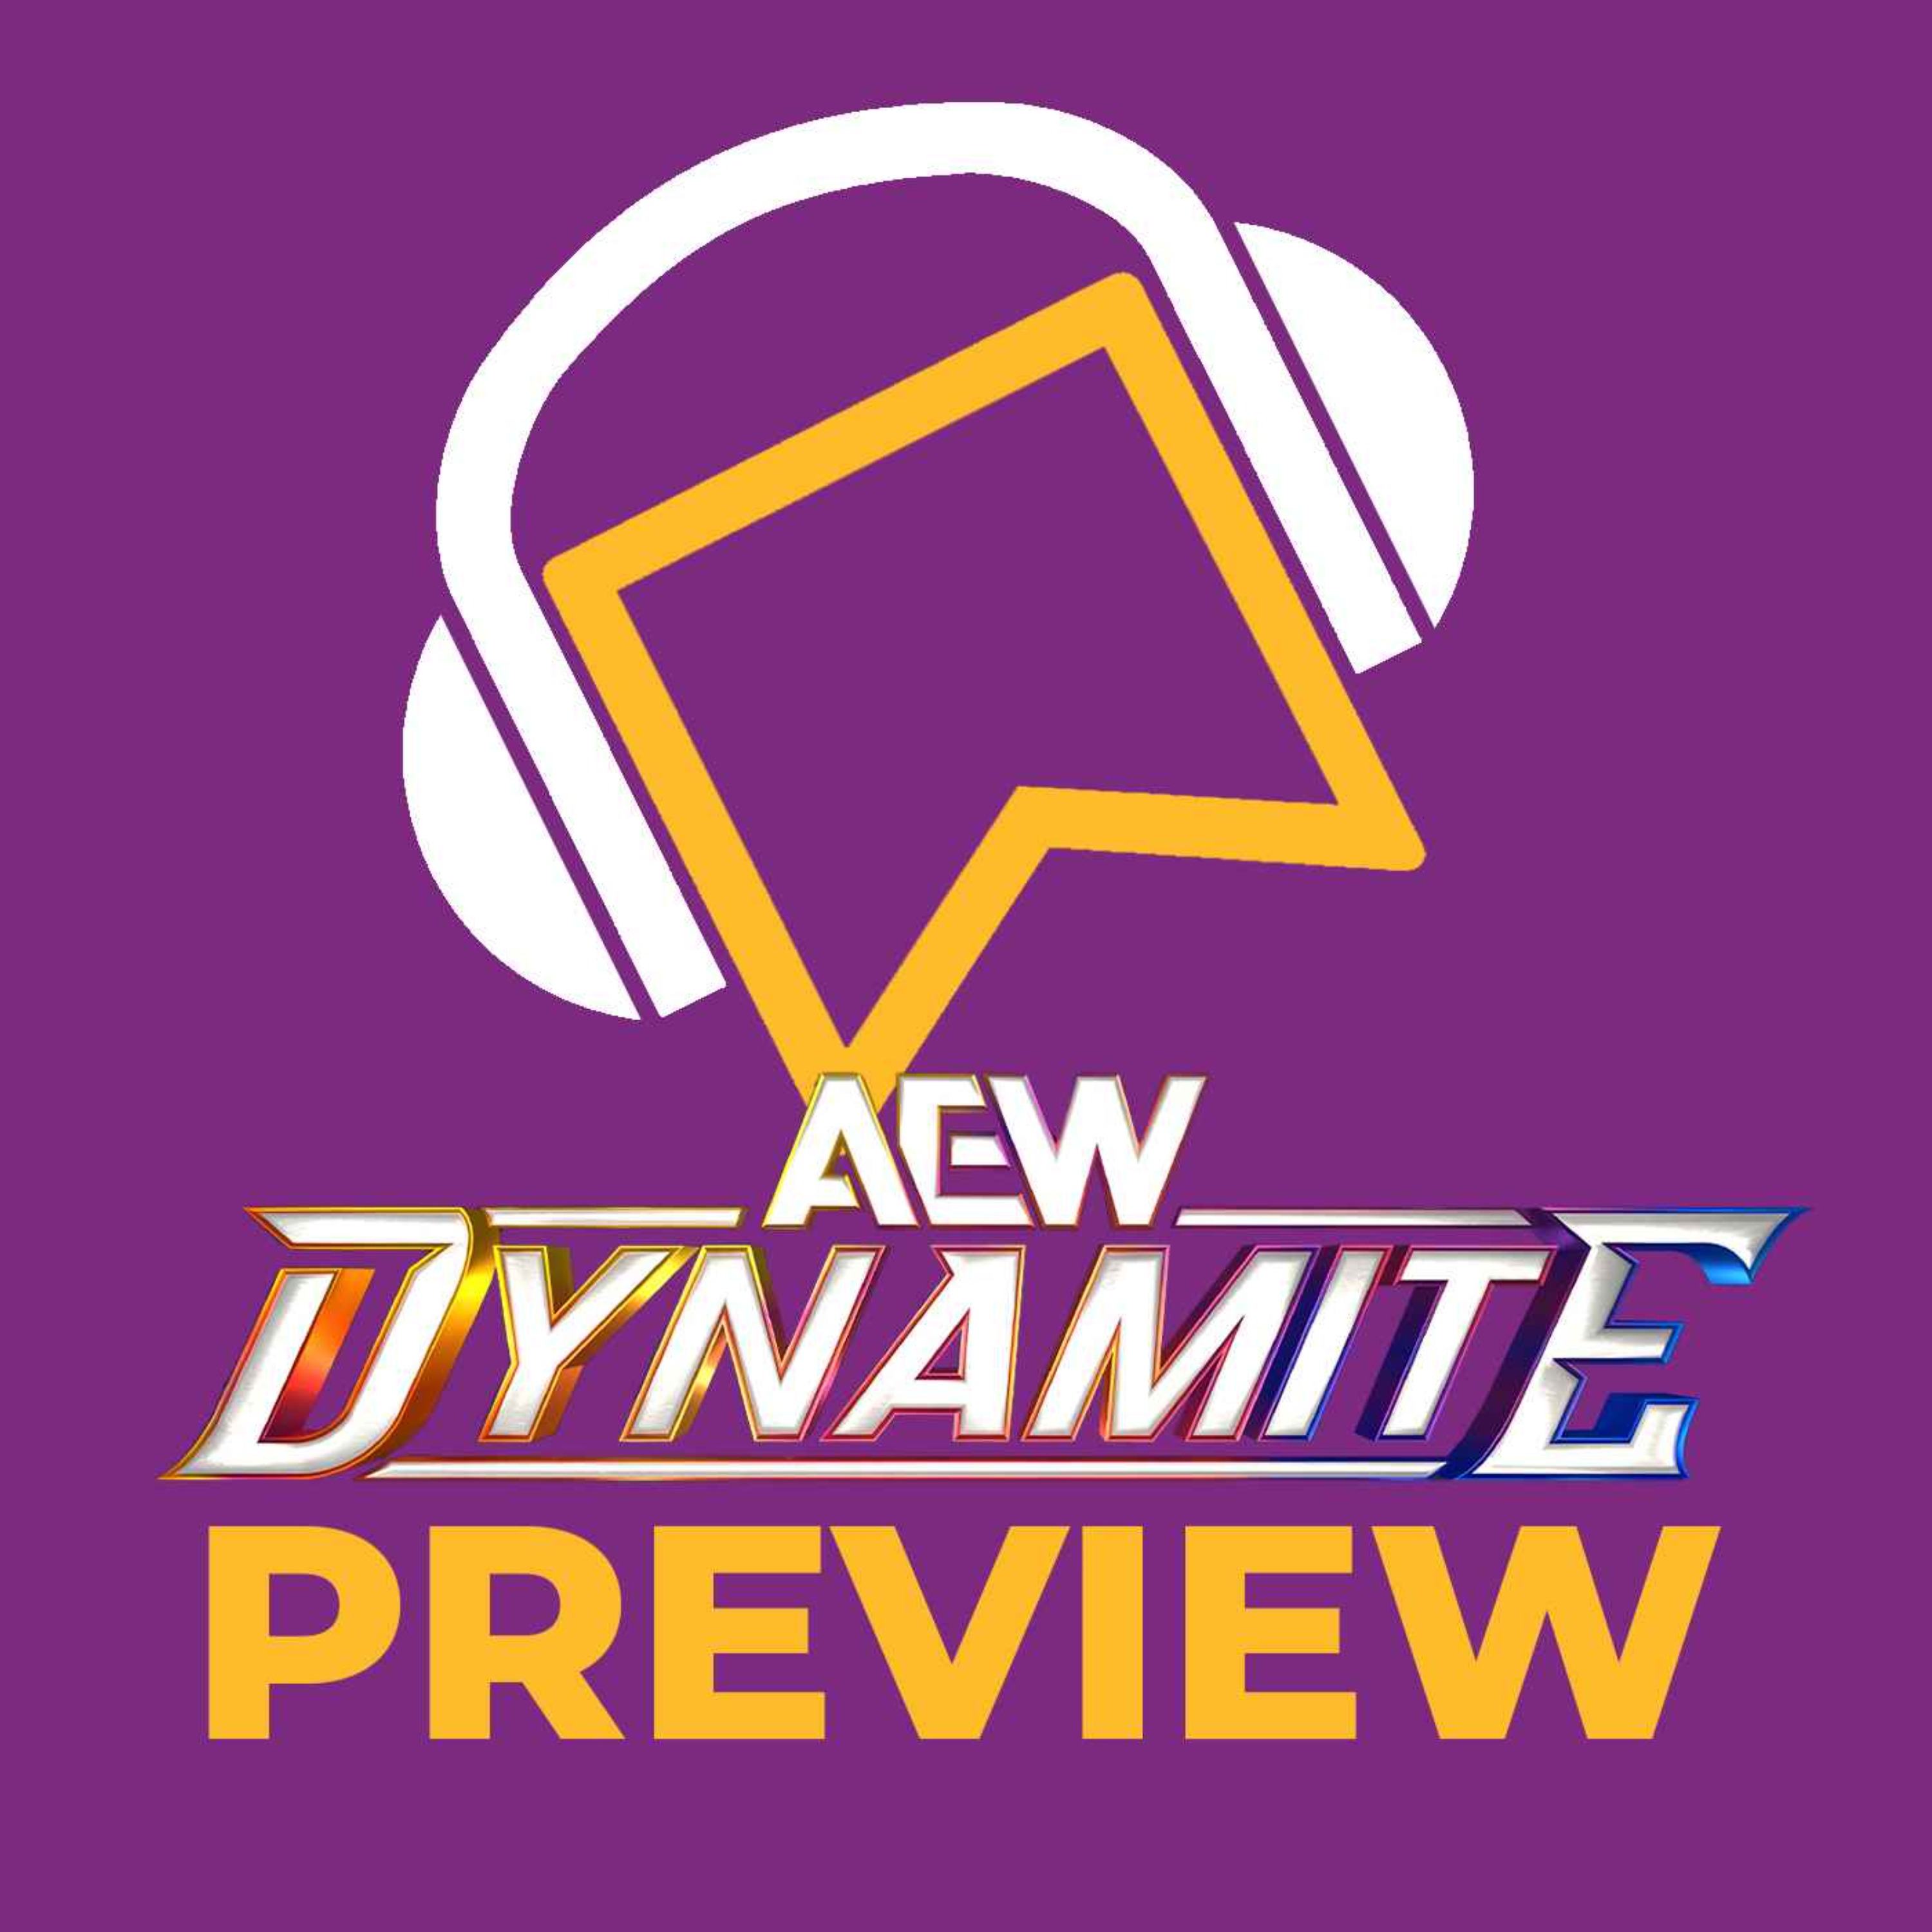 AEW Dynamite Preview - AEW Dynasty FALLOUT! IWGP World Heavyweight Championship On The Line! What Next For Jack Perry? Who Is Chuck Taylor's Best Friend?!